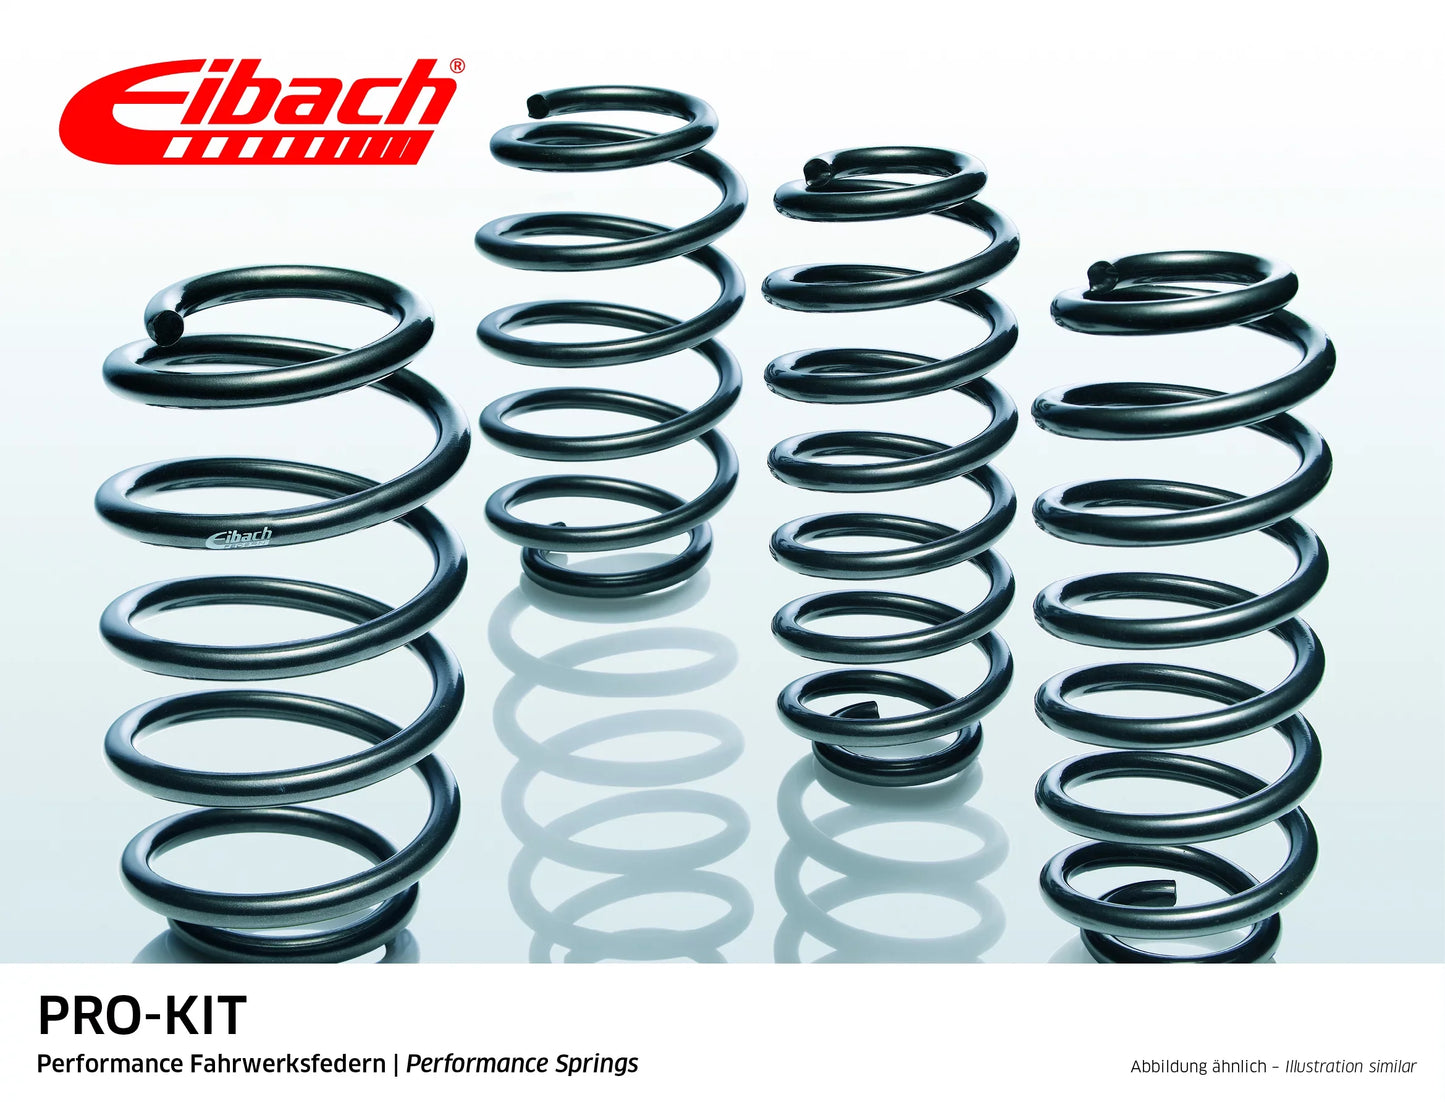 Eibach Pro-Kit Lowering Springs (E2037-140) at £330.74